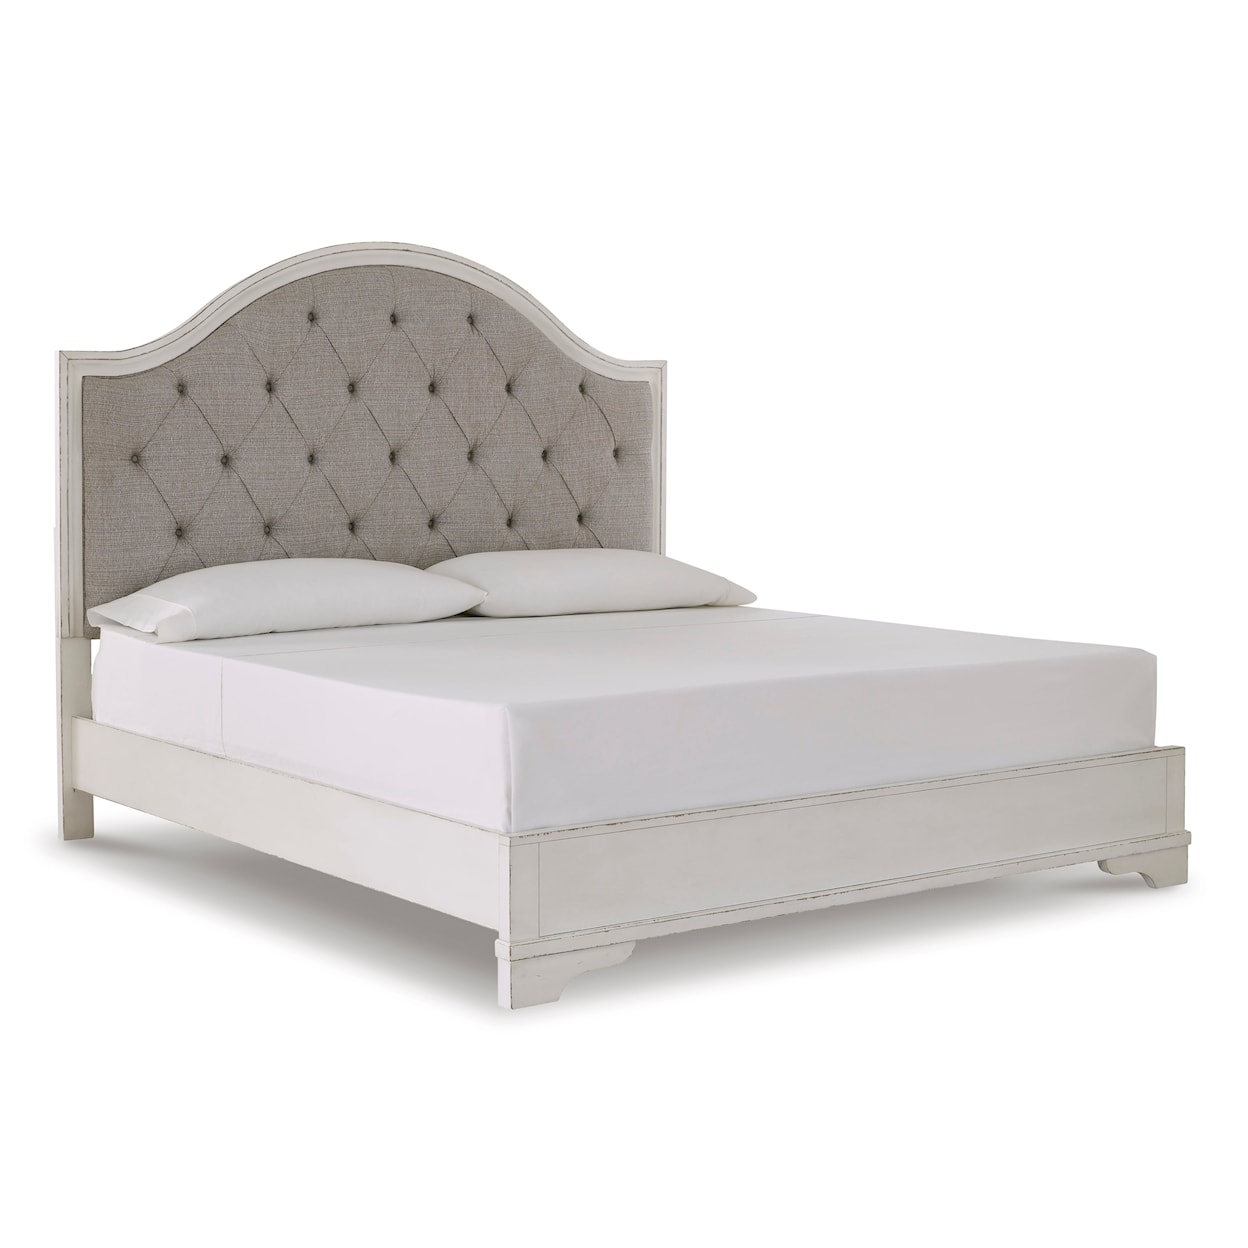 Signature Design by Ashley Brollyn Queen Bed